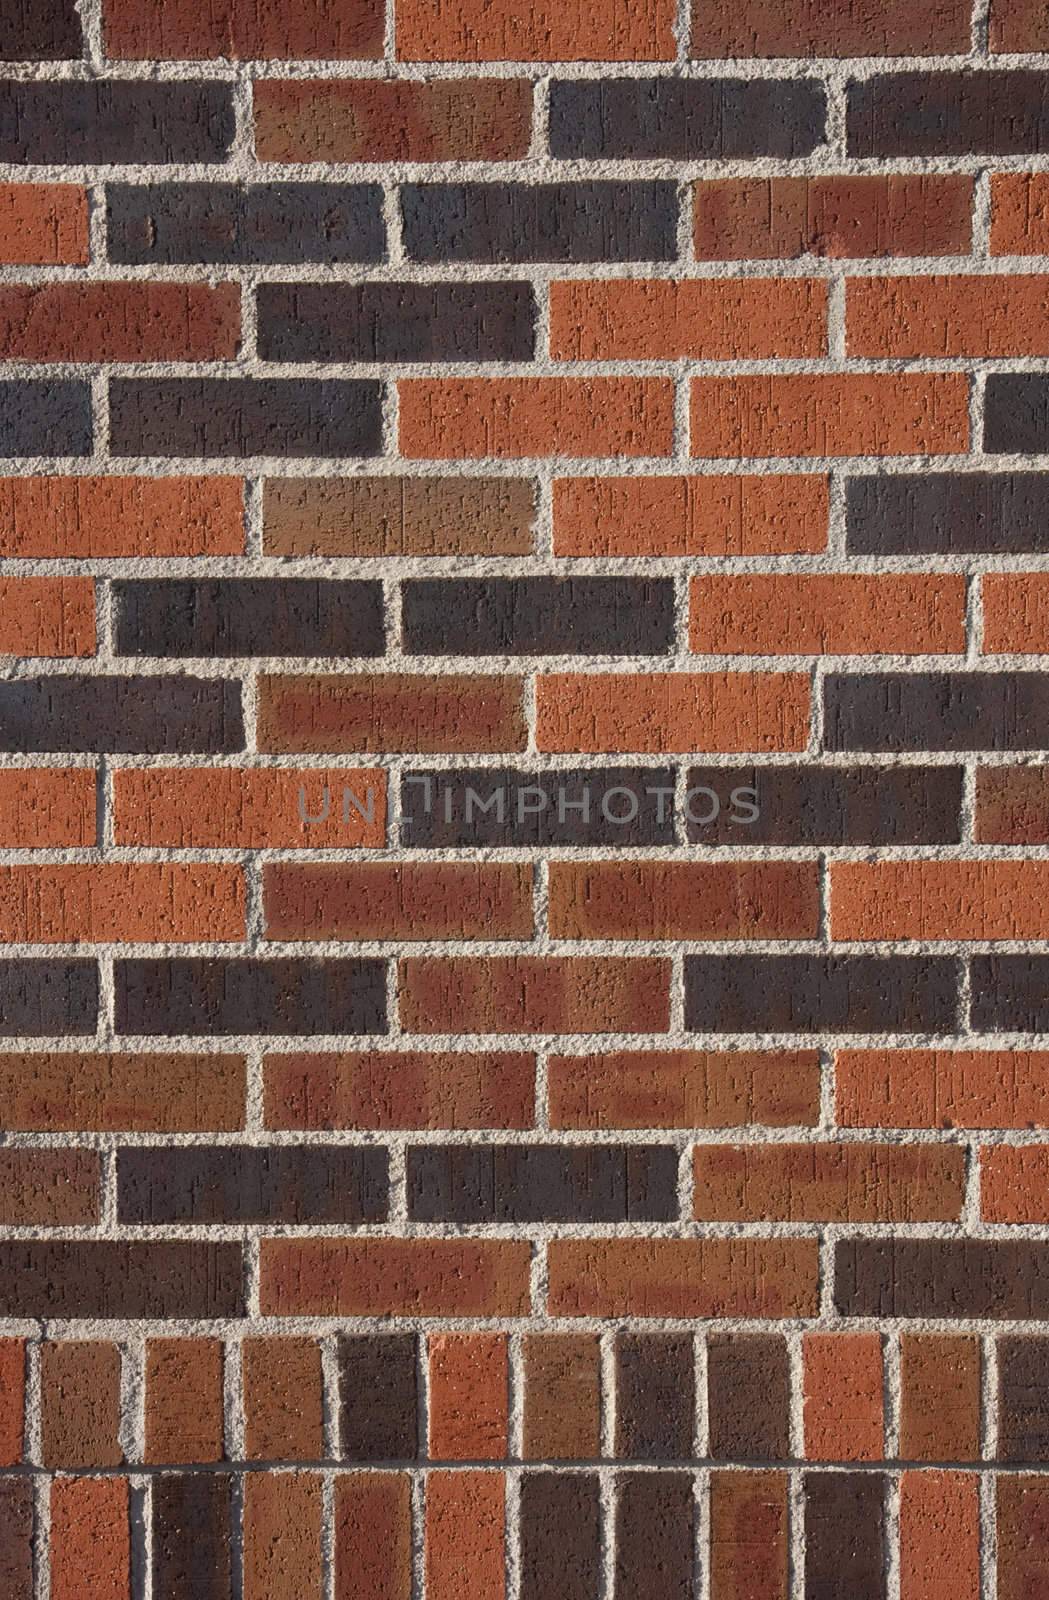 terracotta bricks of different colors from orange to dark brown, wall background